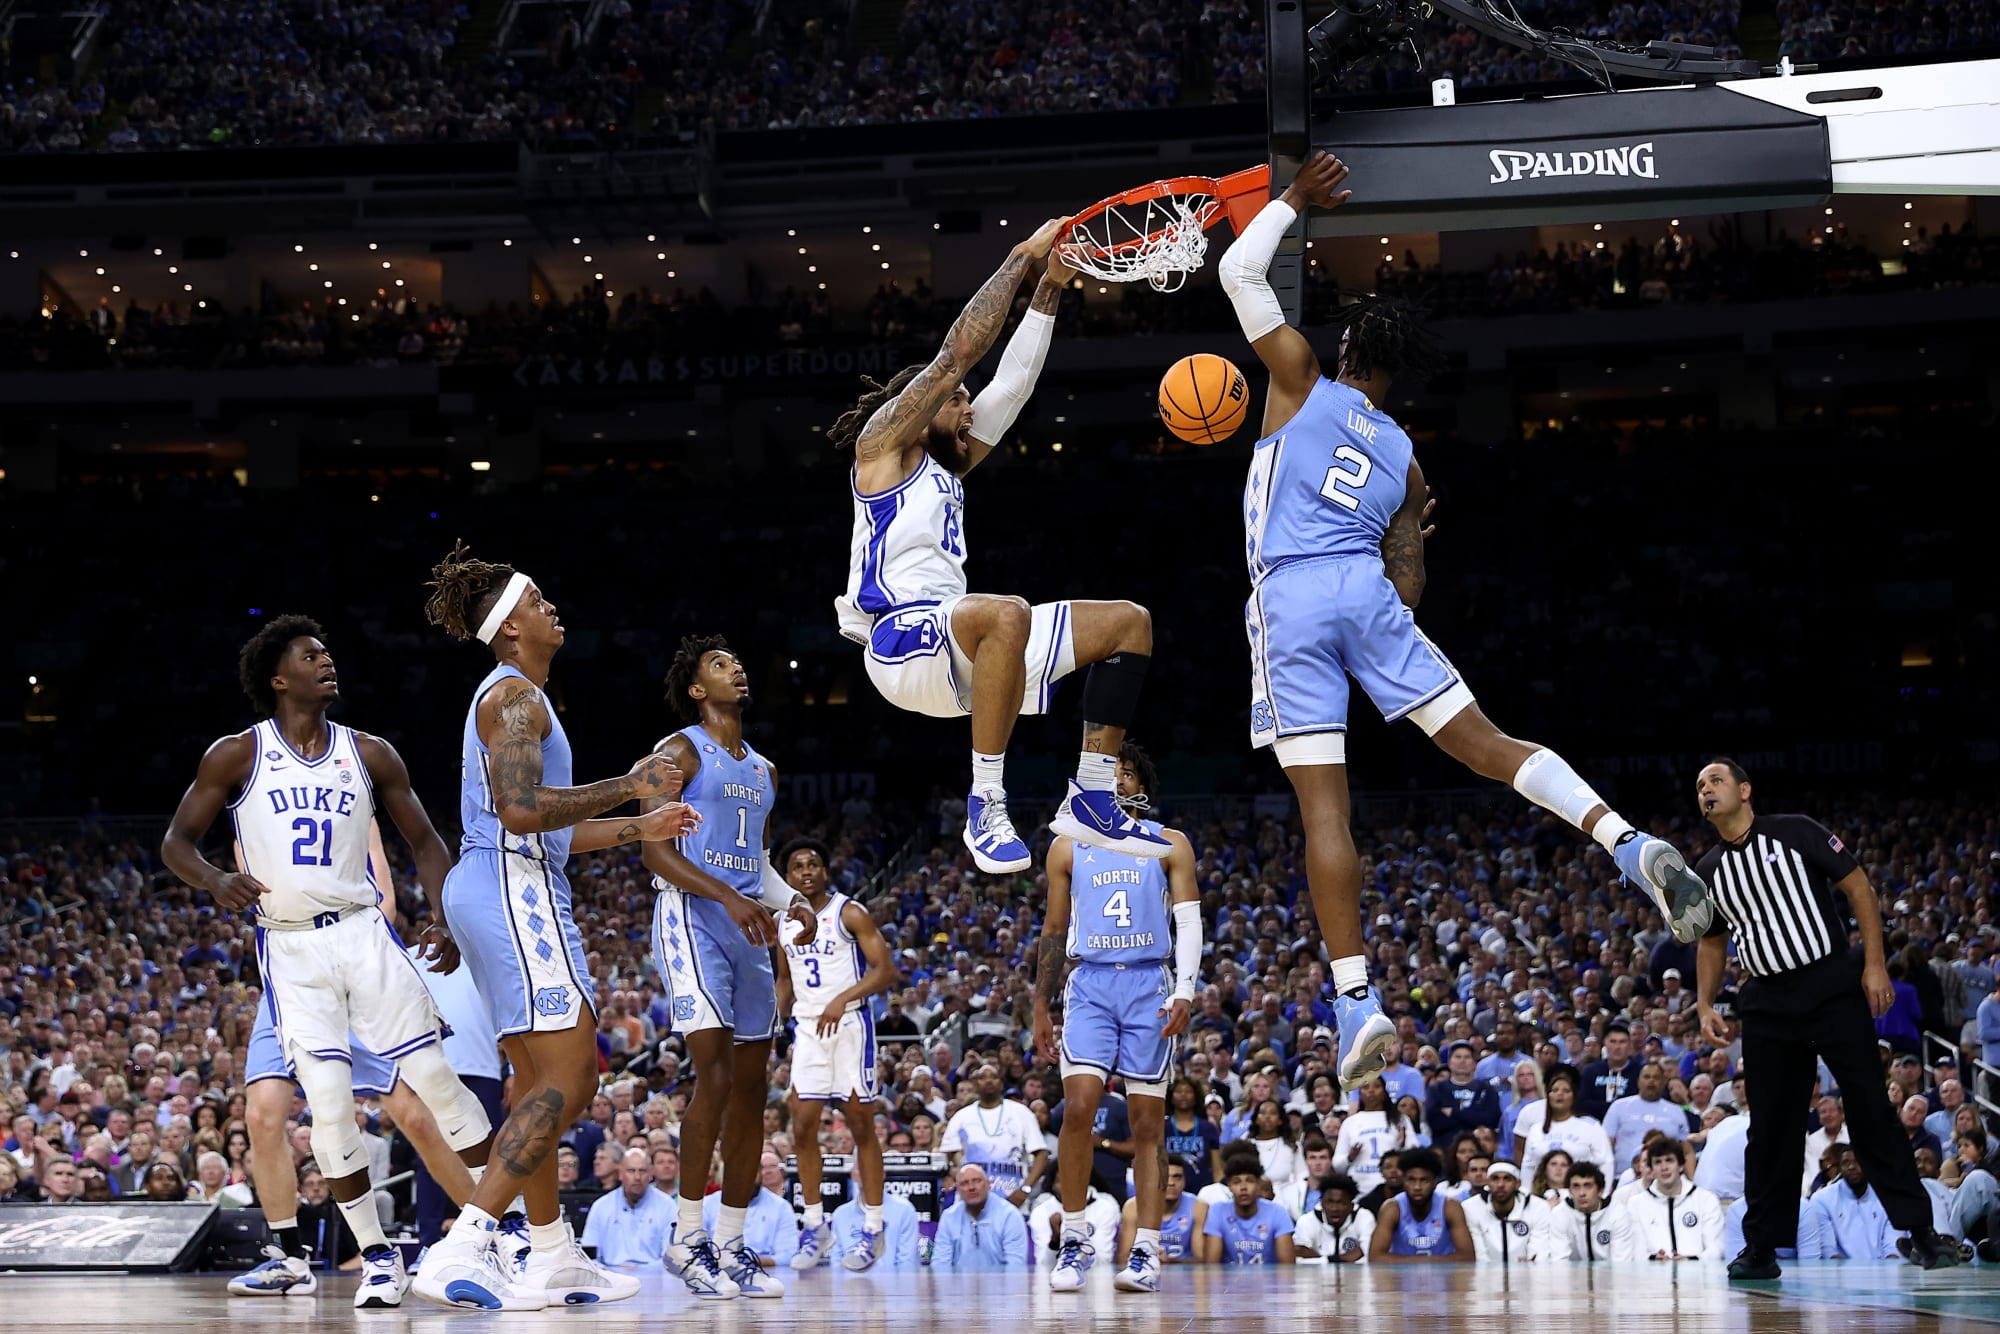 Photo of 39 most iconic sports photos from March Madness and Getty Images